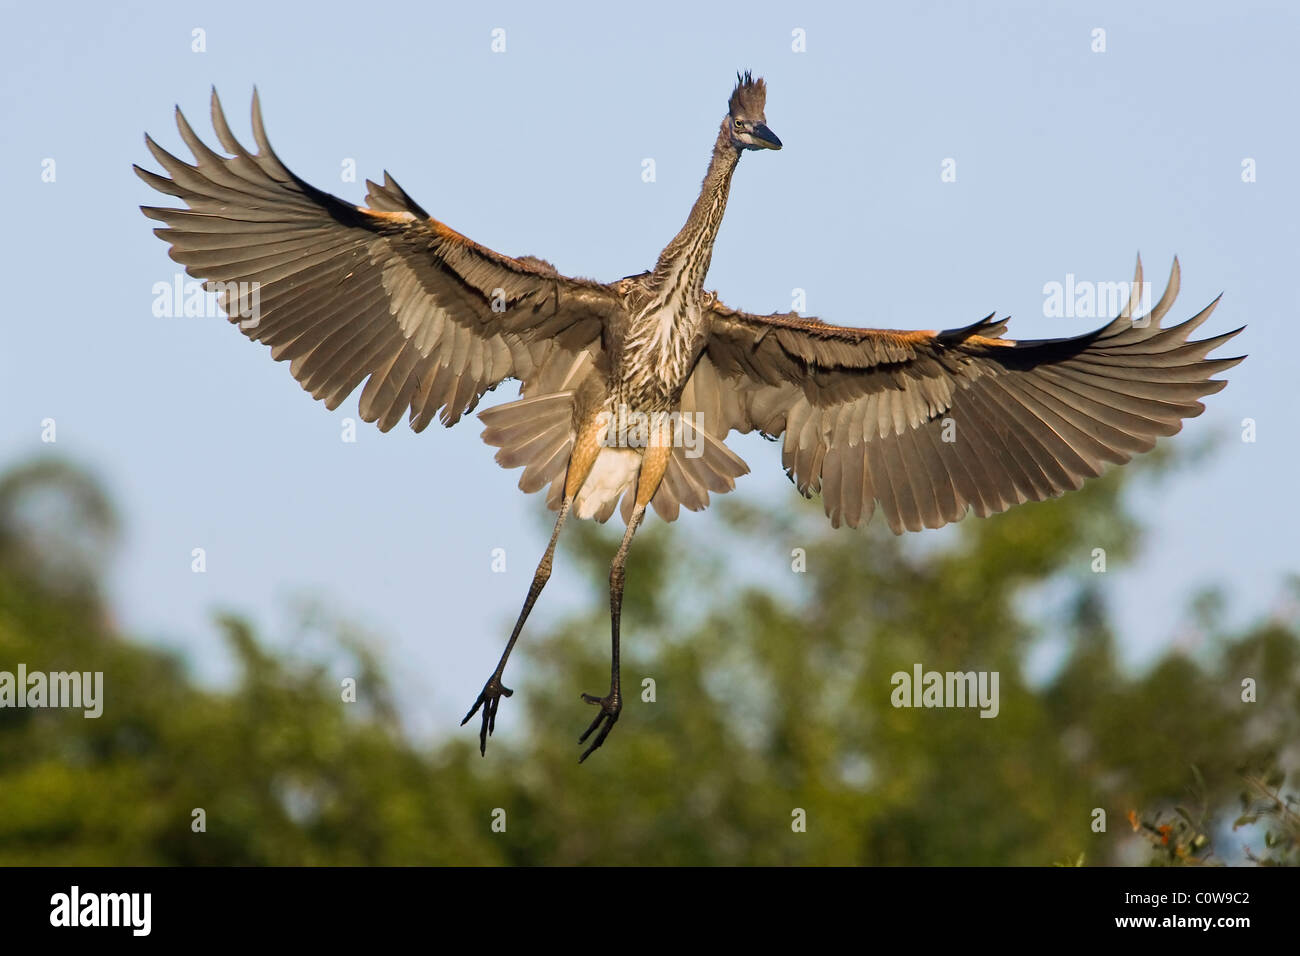 A fledgling Great Blue Heron learning to fly Stock Photo